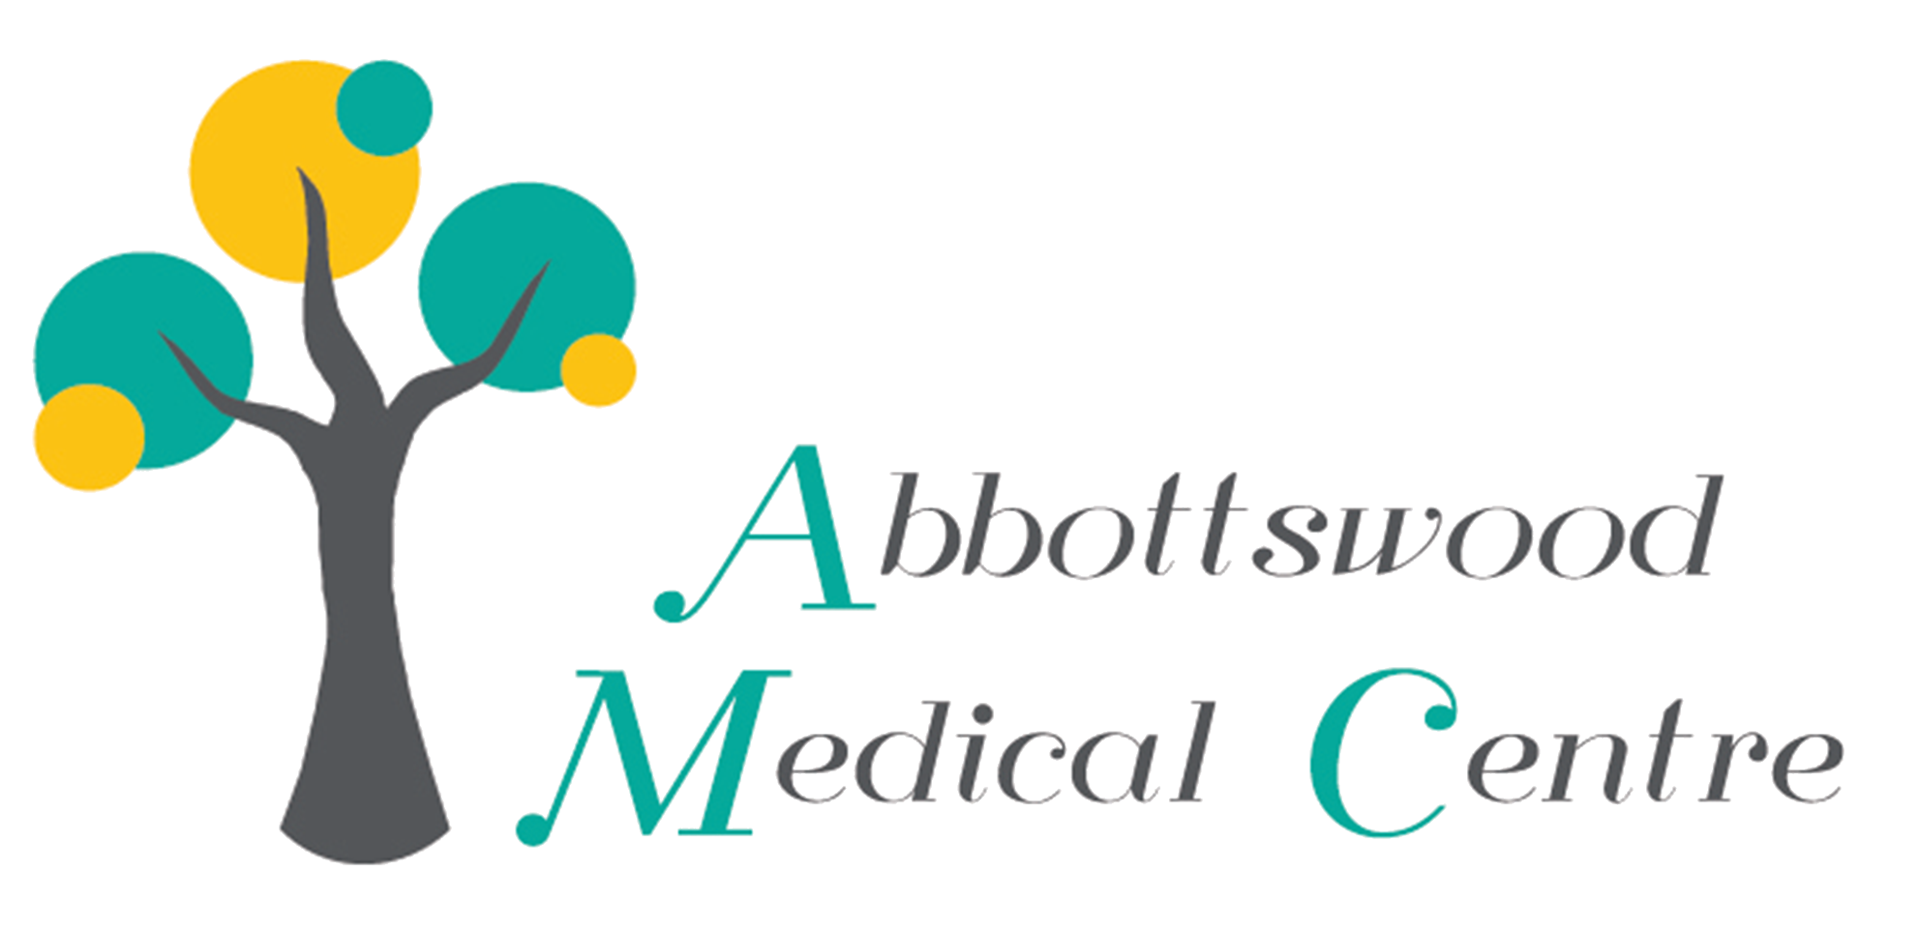 Welcome to Abbottswood Medical Centre Logo